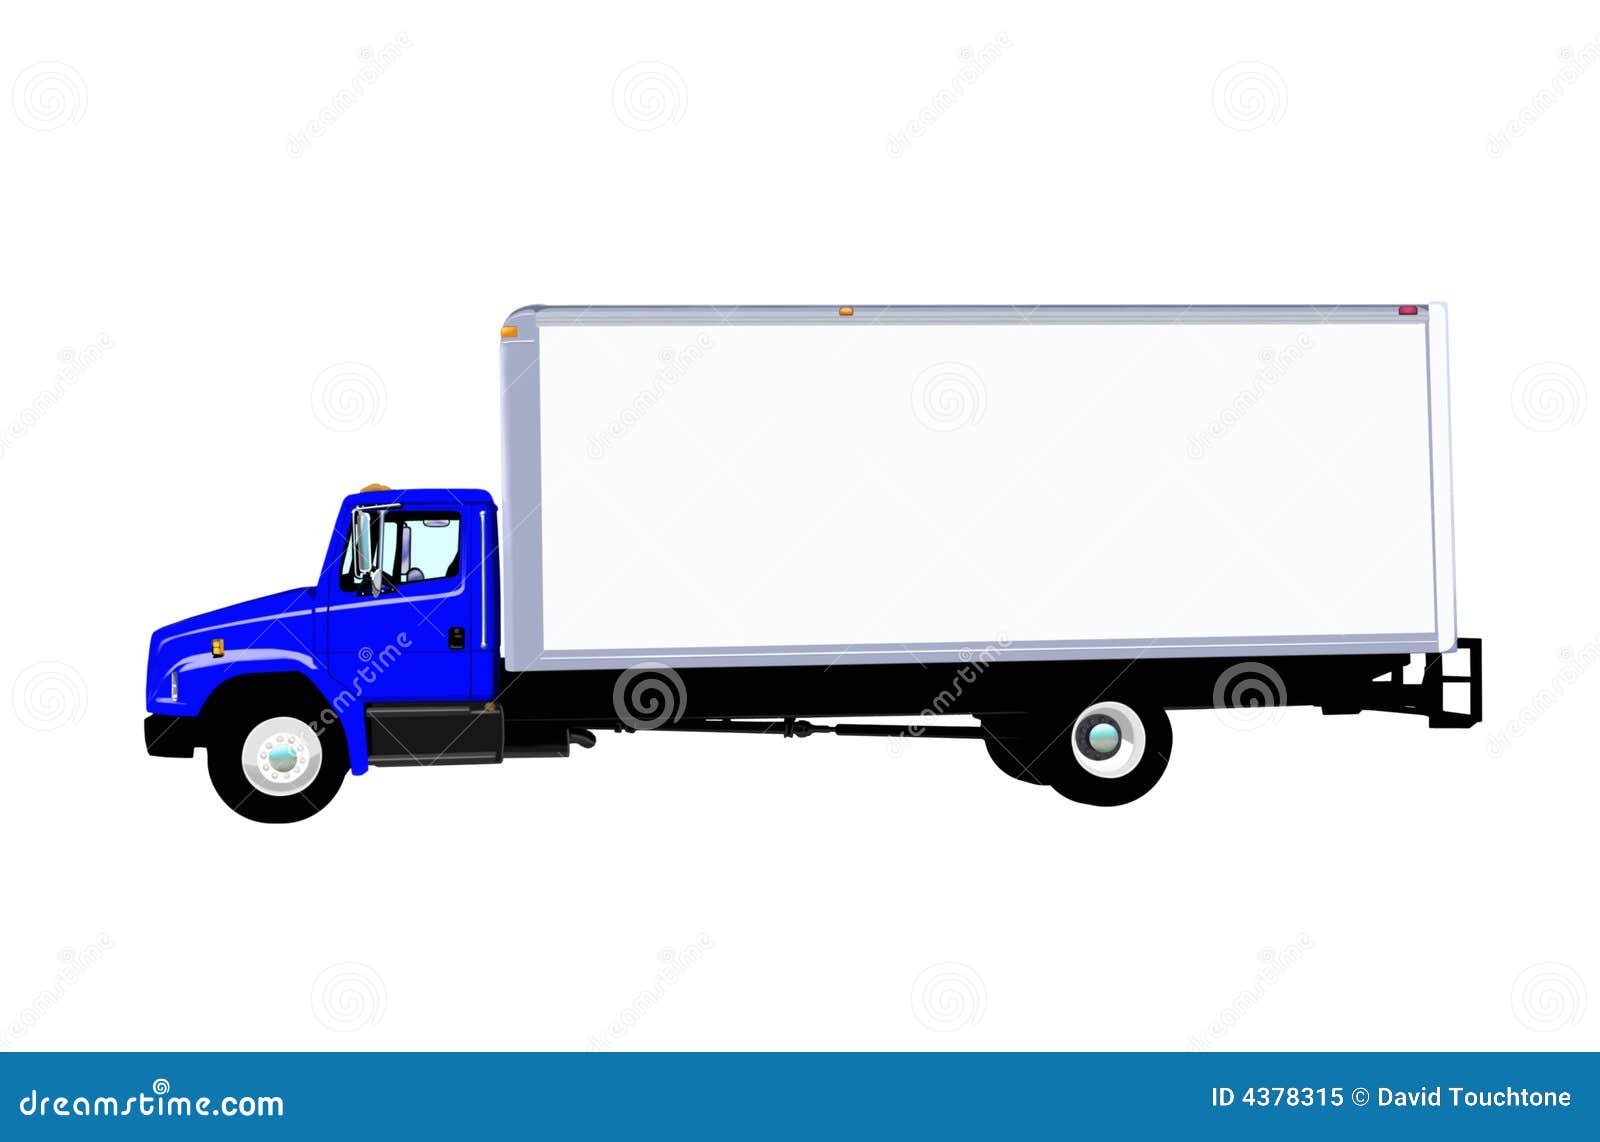 delivery truck clipart images - photo #50